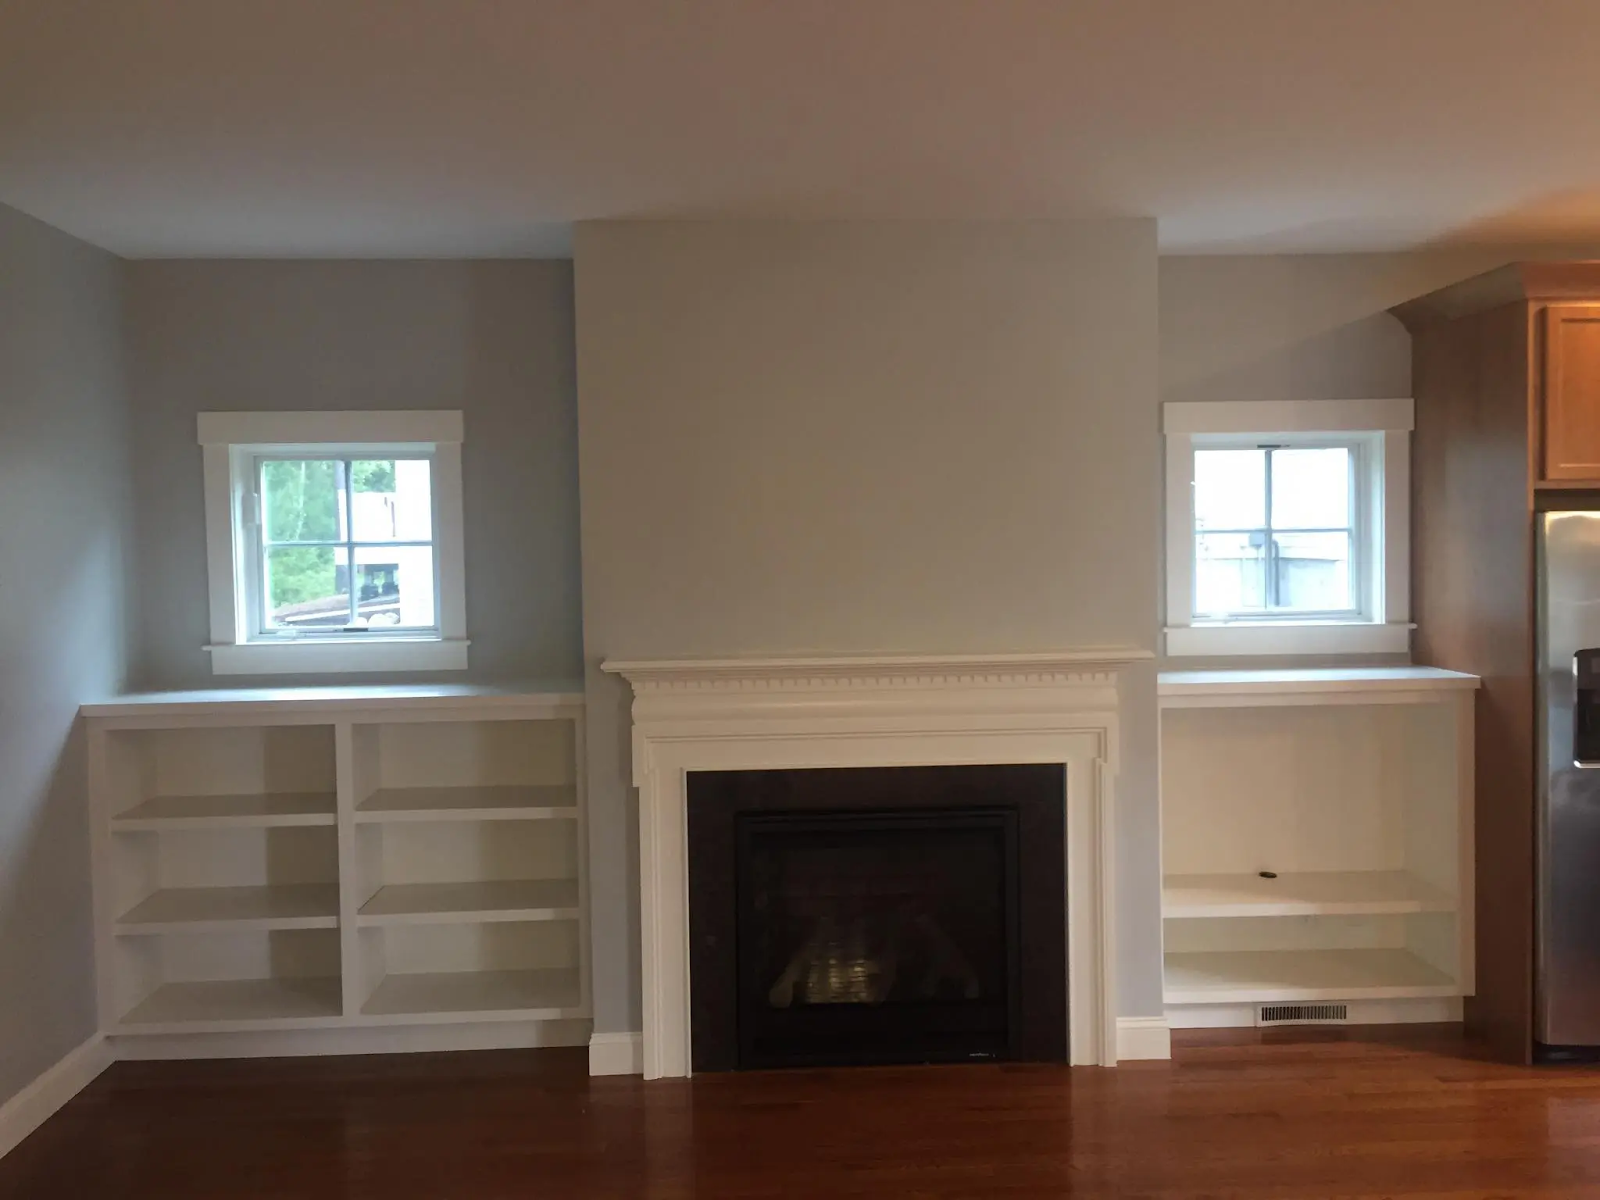 An undecorated living room with white shelves on each side of a fireplace.